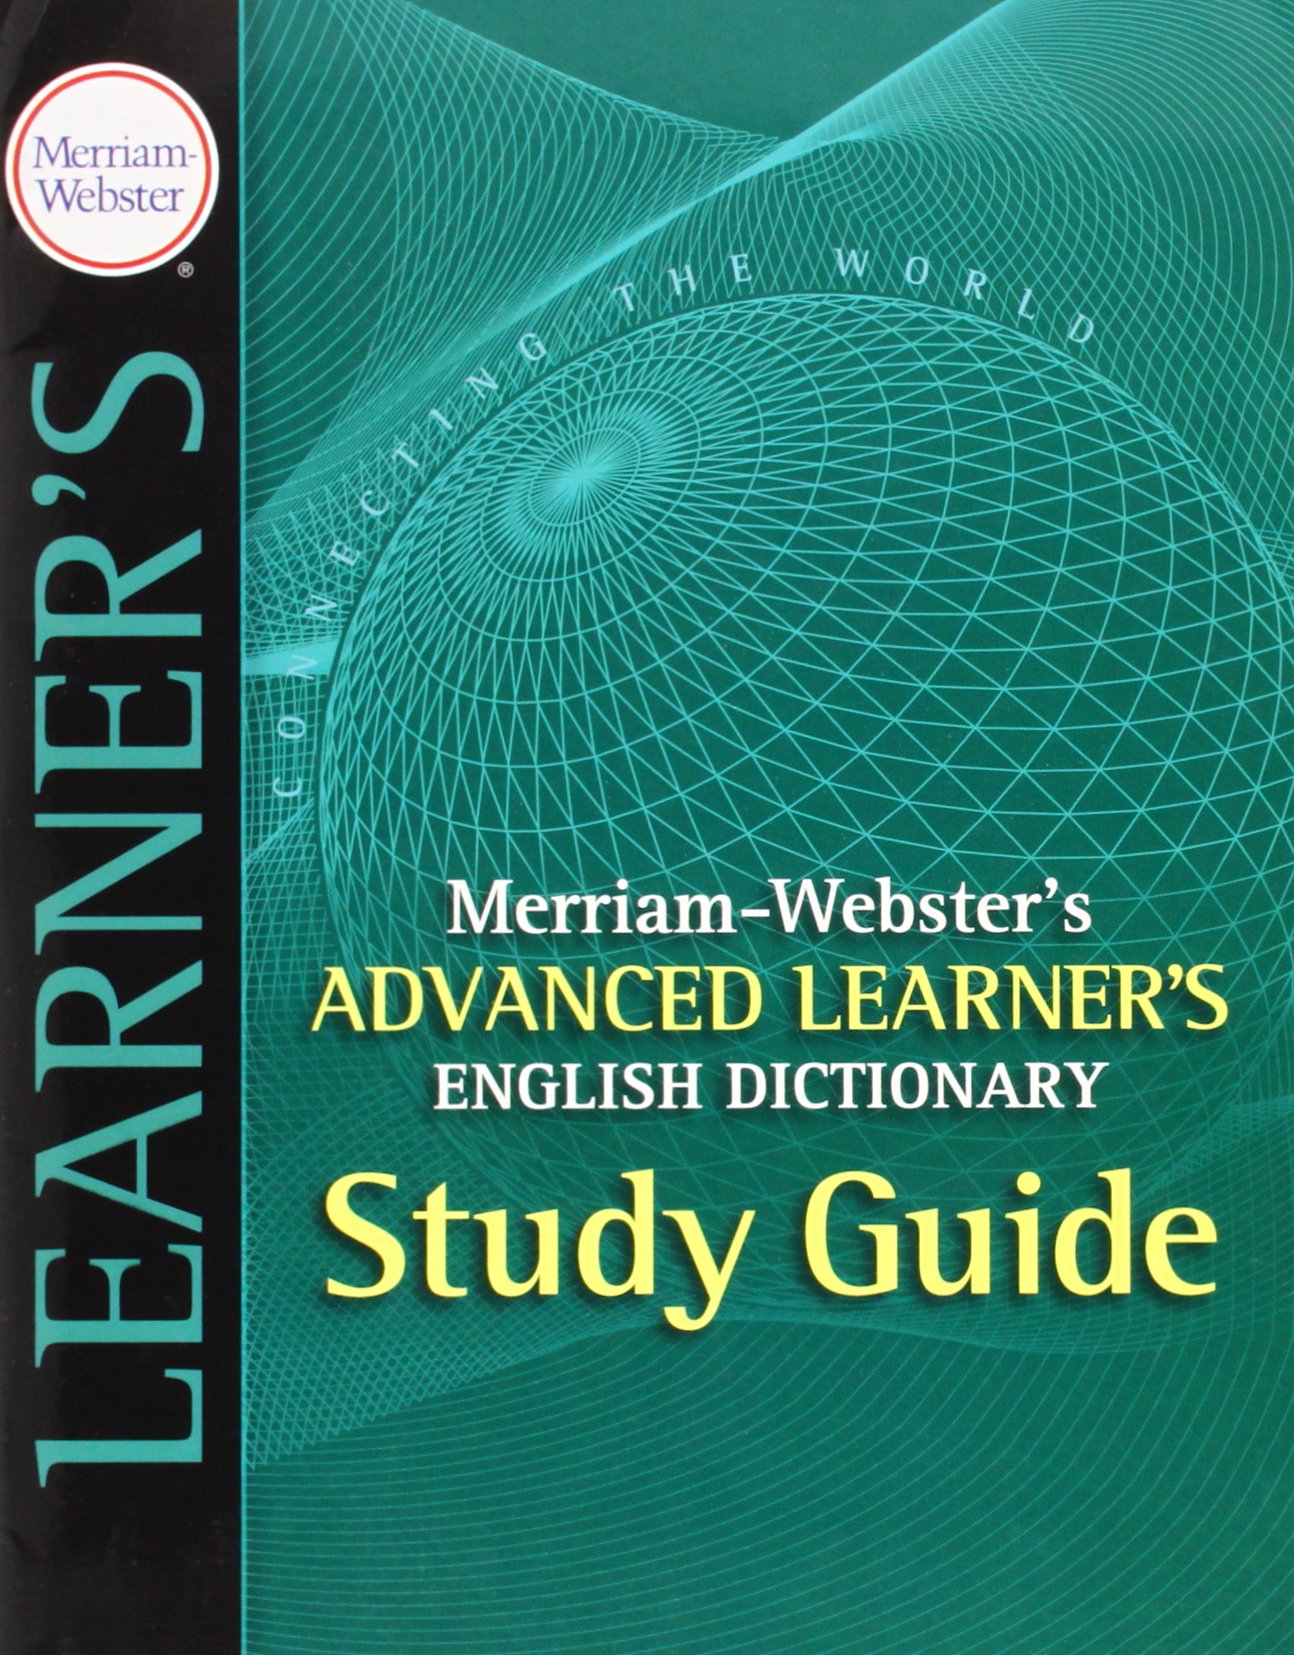 Merriam-Webster's Advanced Learner's English Dictionary. Study Guide | 